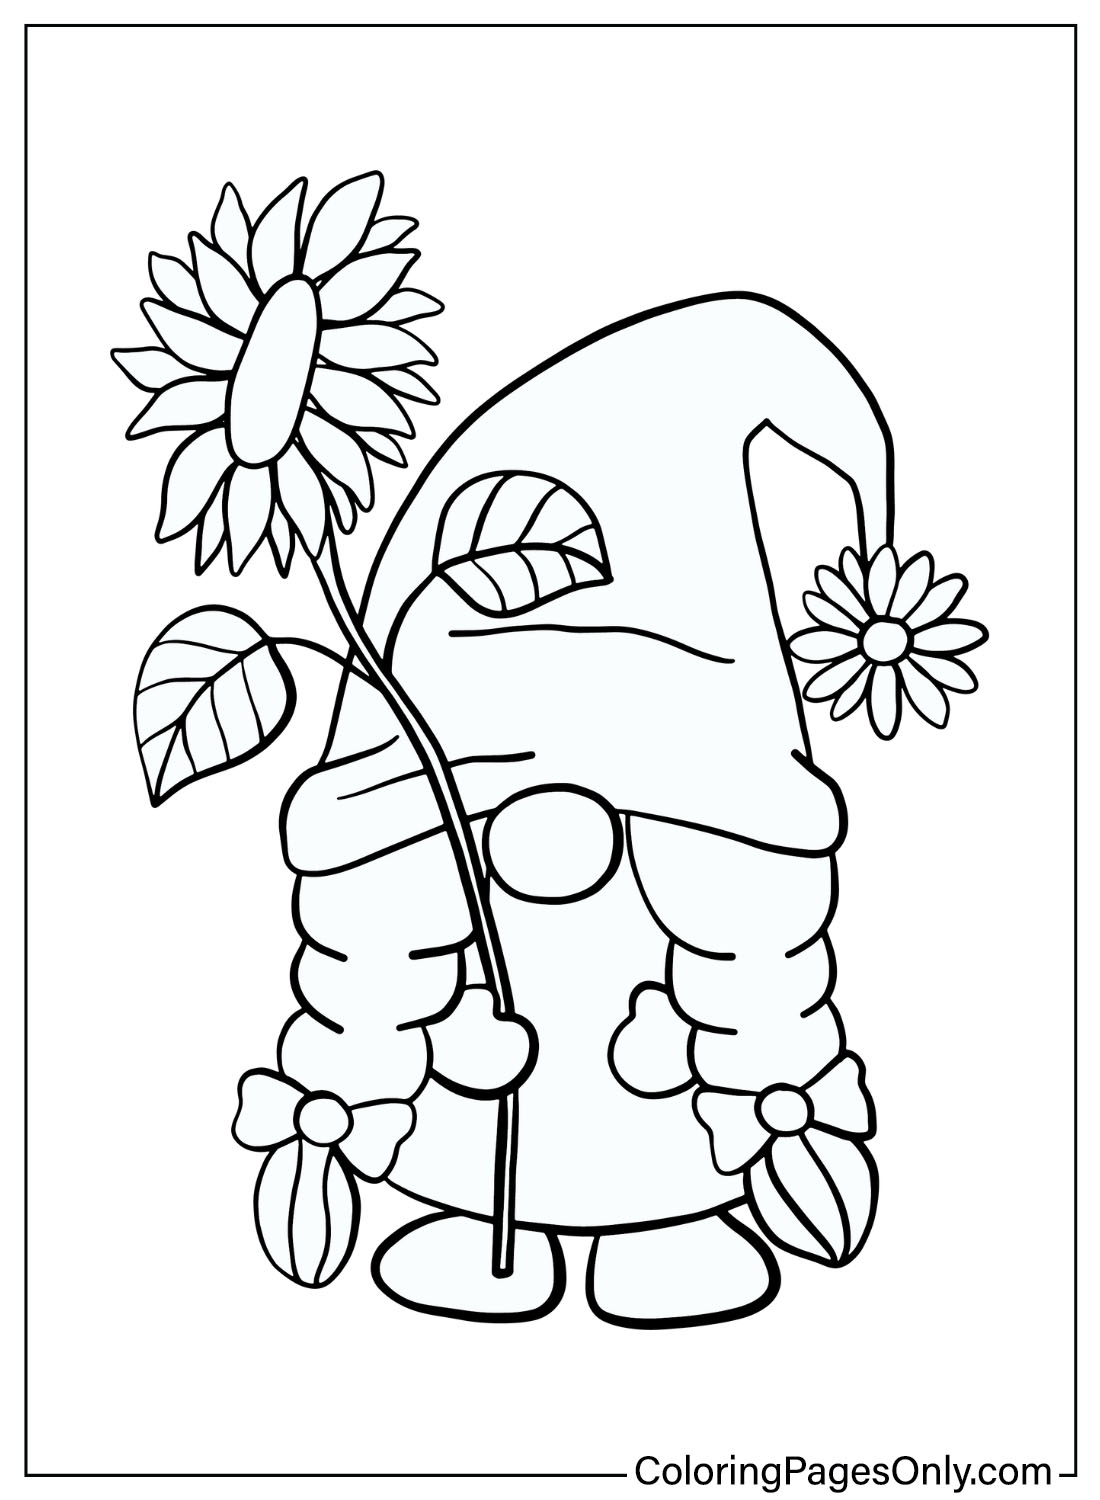 Coloring Page Sunflower with Gnome from Sunflower